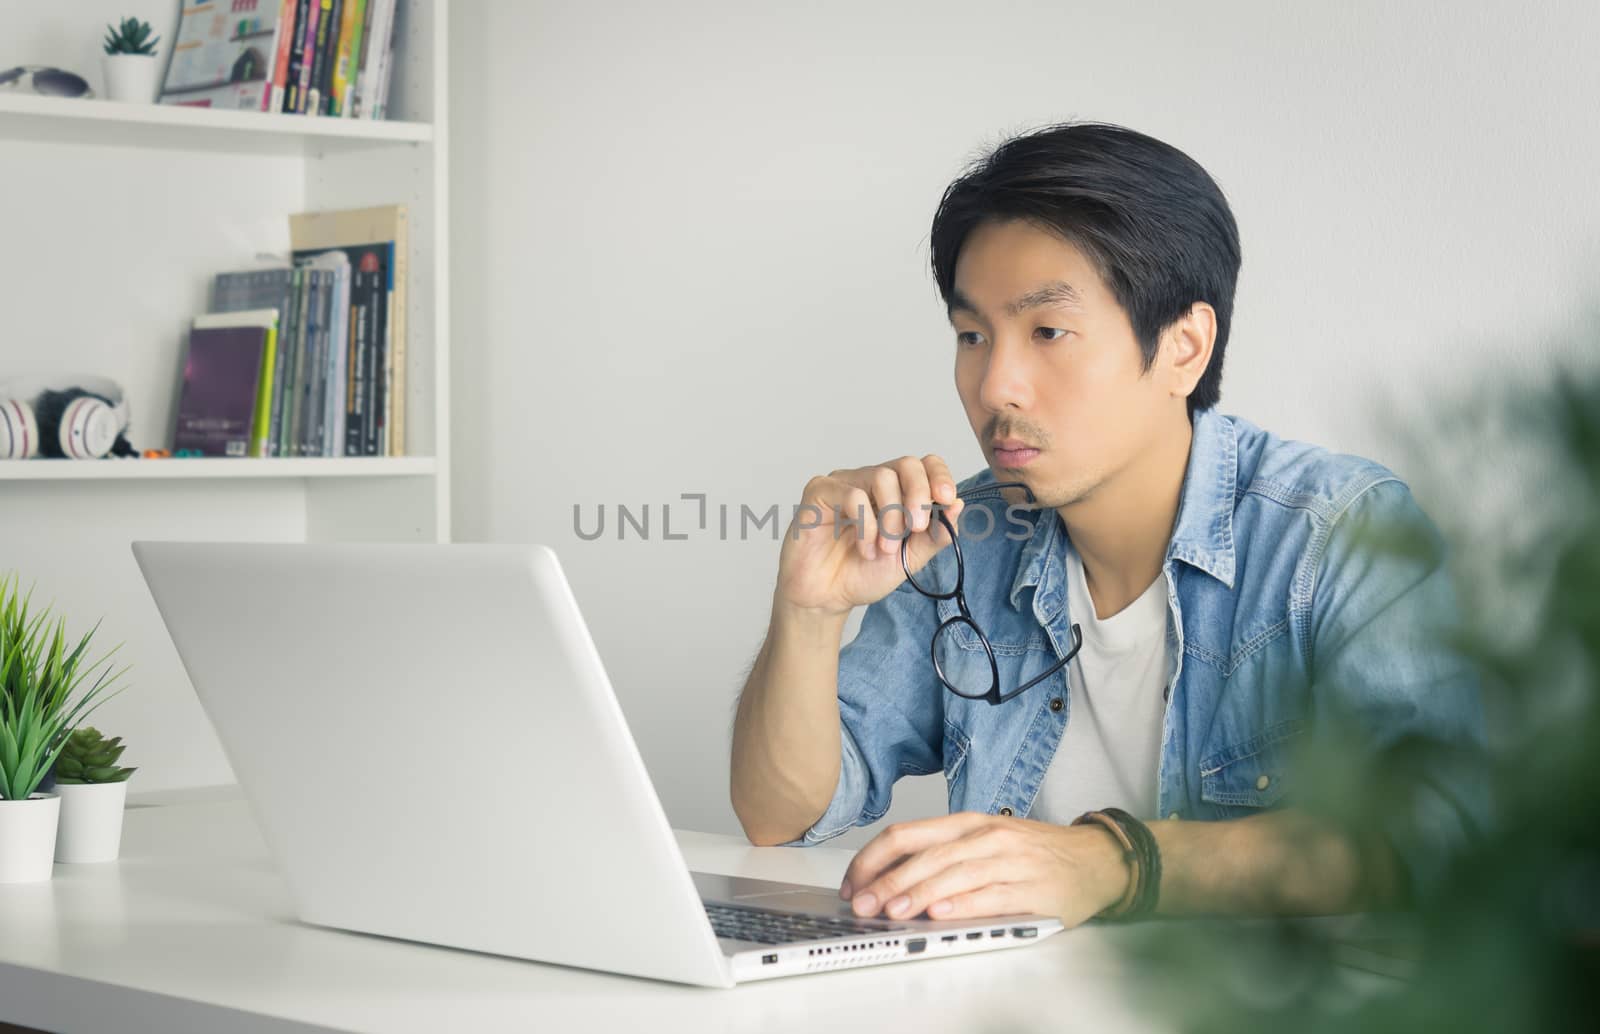 Asian Casual Businessman or Freelancer in Denim or Jeans Shirt Hold Eyeglasses and Working with Laptop in Home Office. Serious casual businessman or Freelancer working with technology